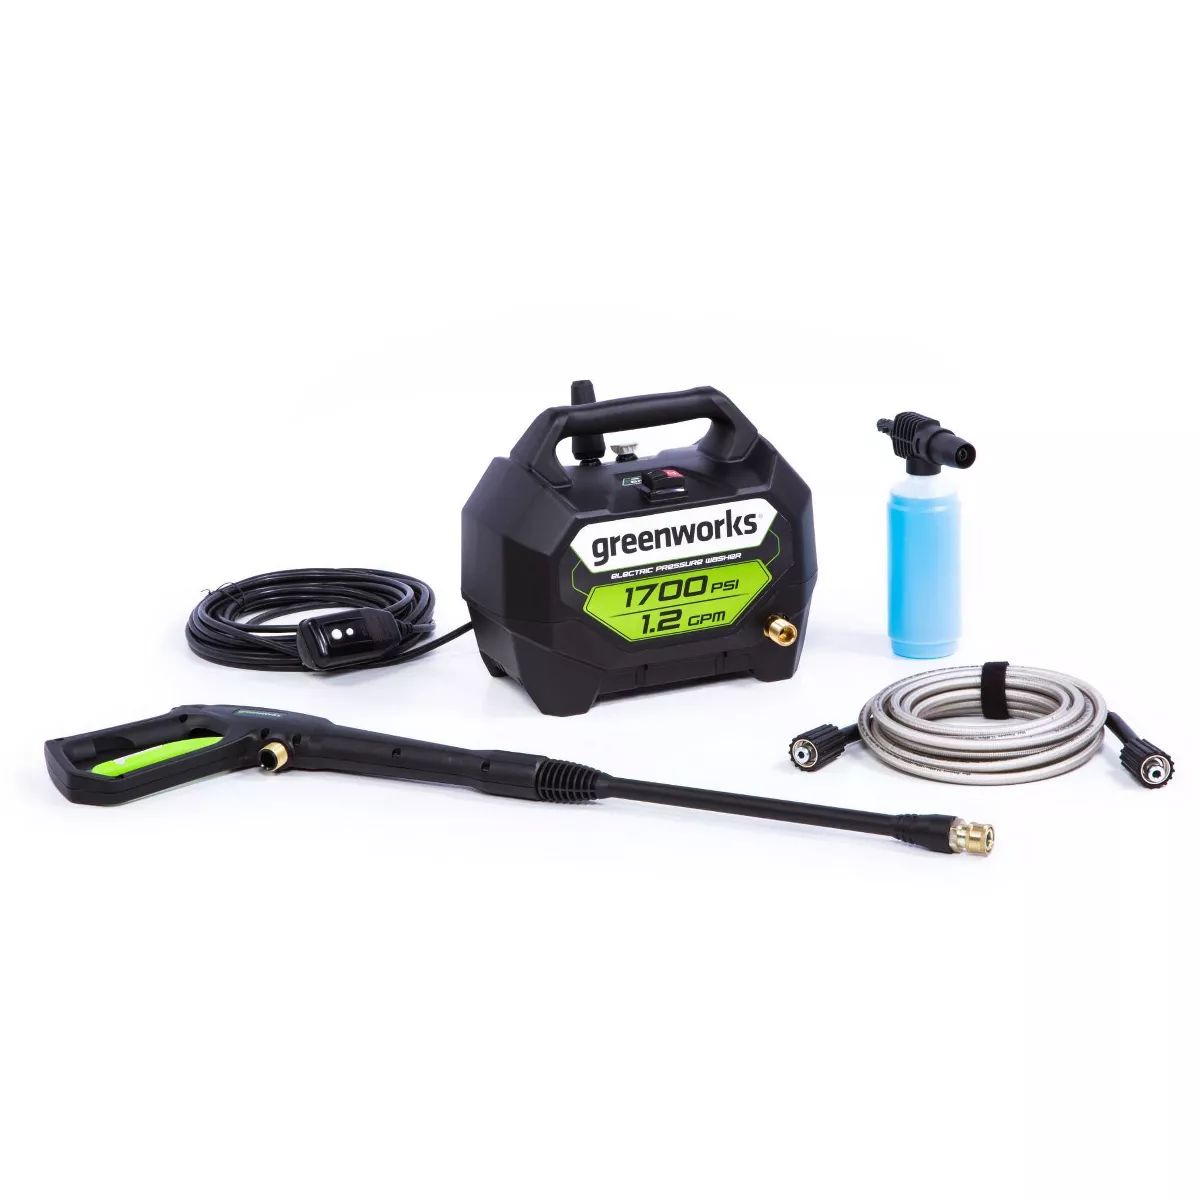 Greenworks 1700 PSI Corded Electric Pressure Washer | Target